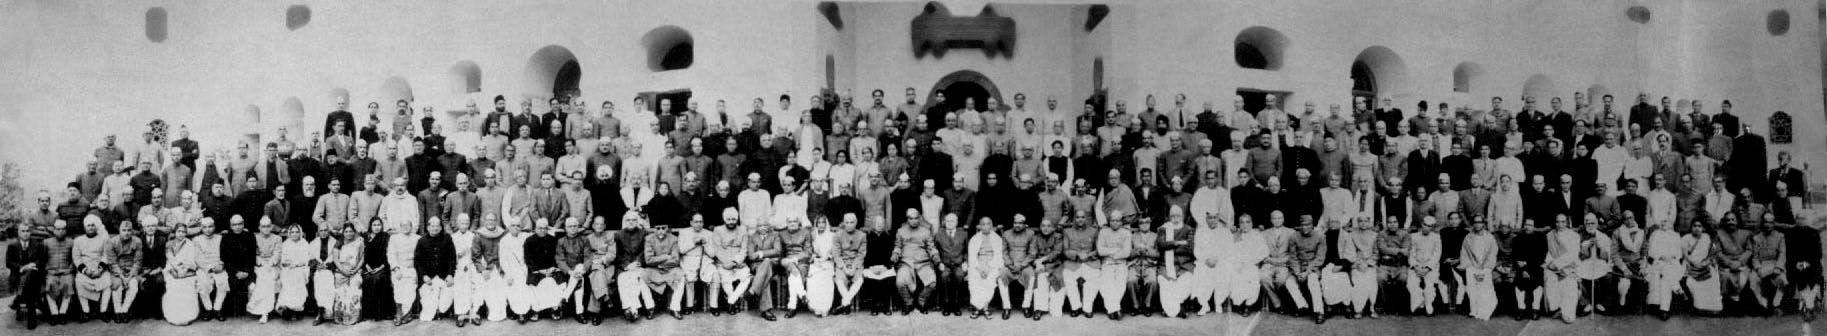 Group_Photograph_of_the_Constituent_Assembly_Members_1950